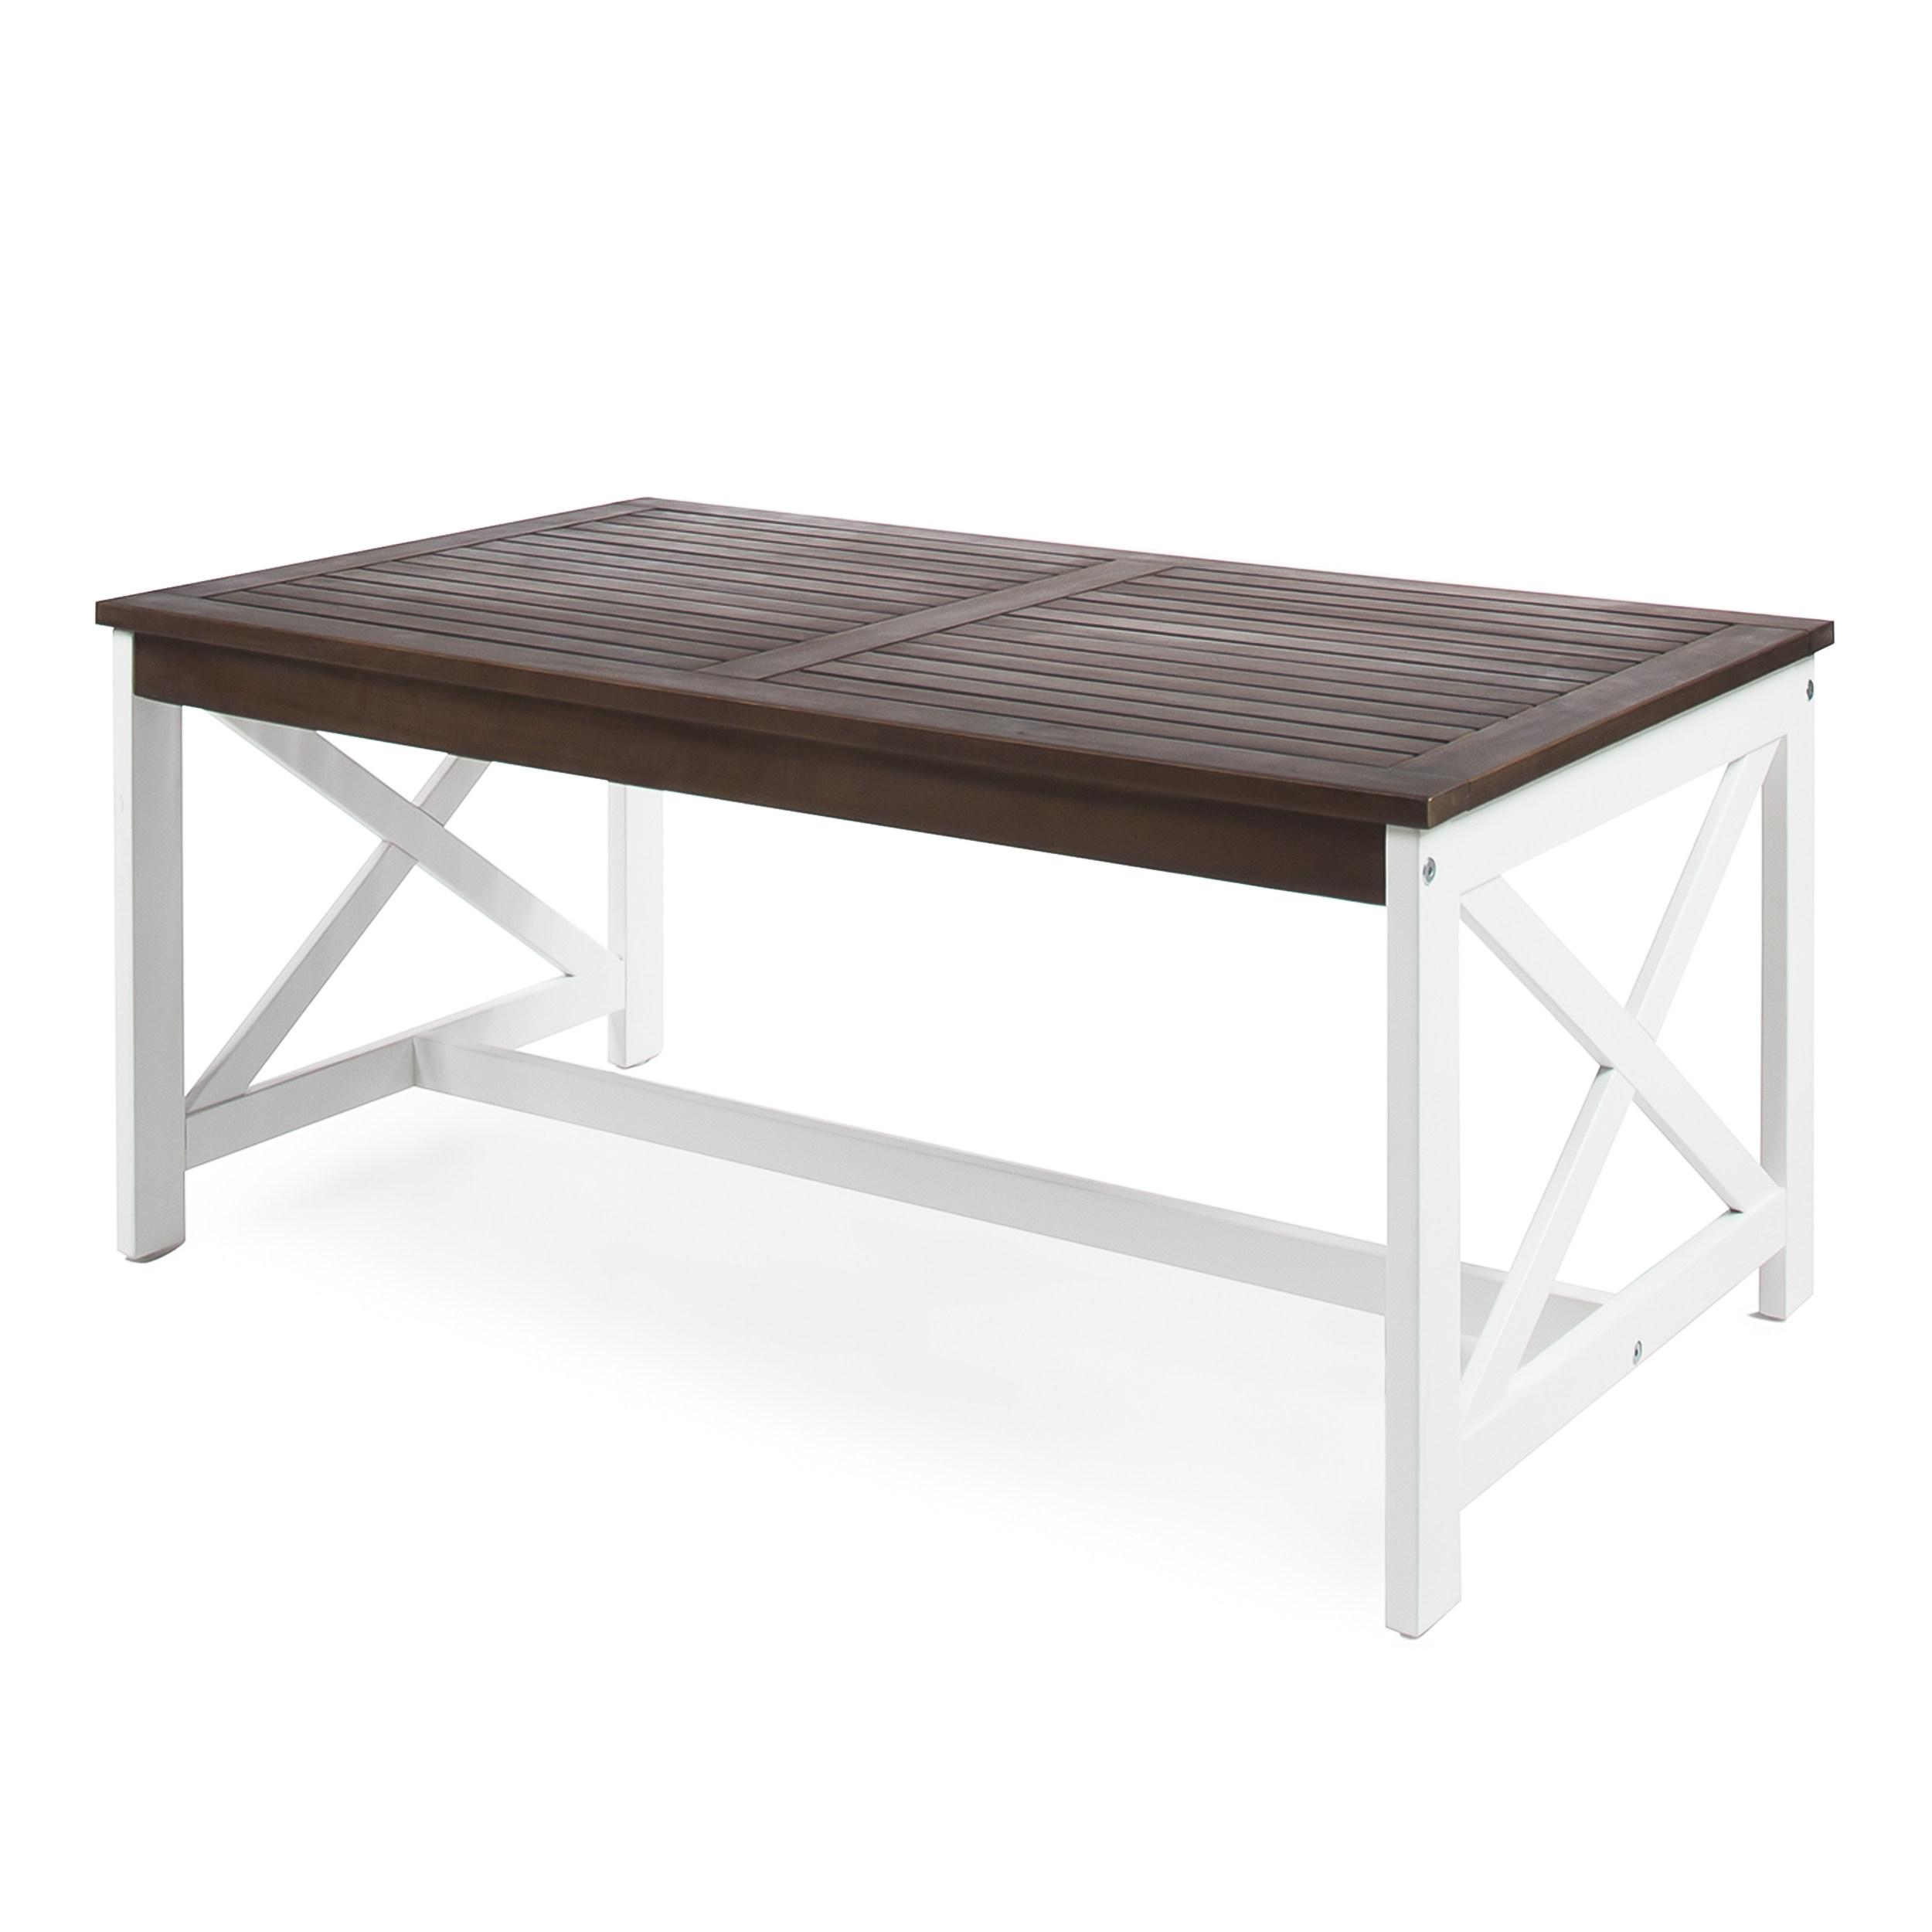 Ismus Outdoor Acacia Wood Coffee Table with a White Base, Dark Brown - image 1 of 9